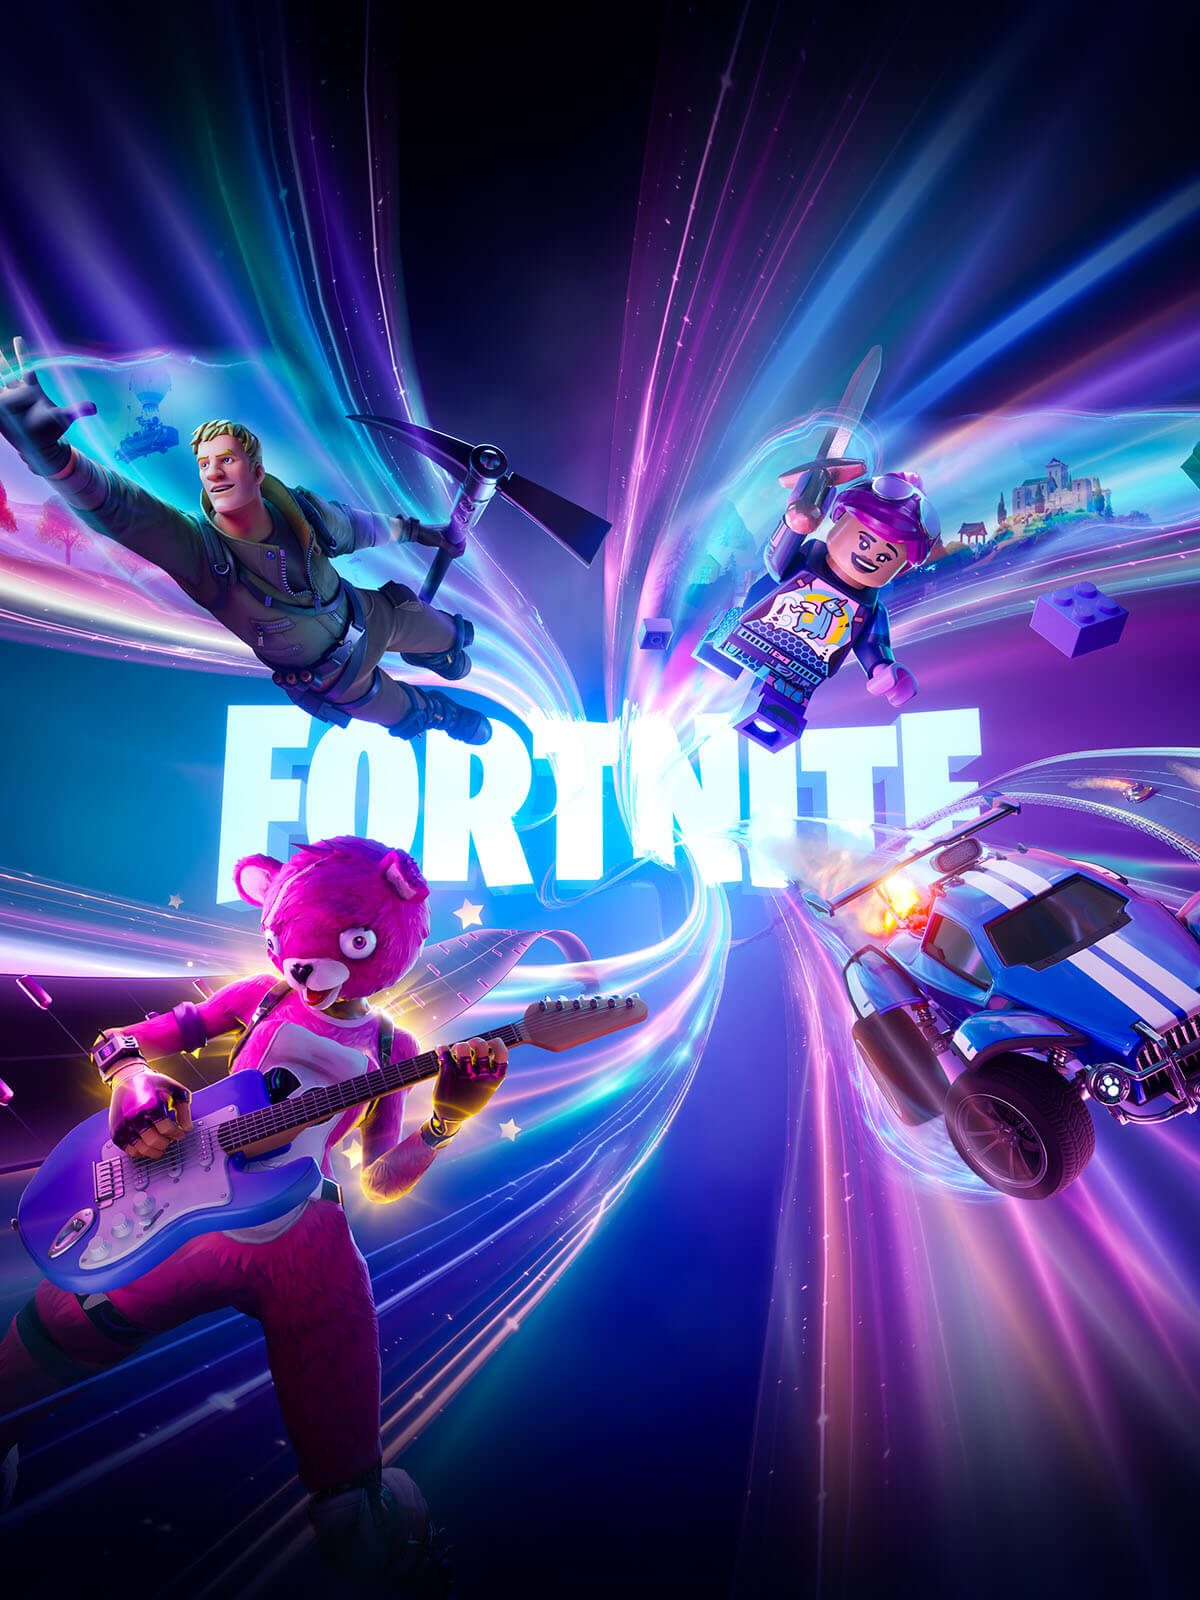 Fortnite Completes Transition to Full-Blown PS5, PS4 Platform with LEGO,  Racing Games